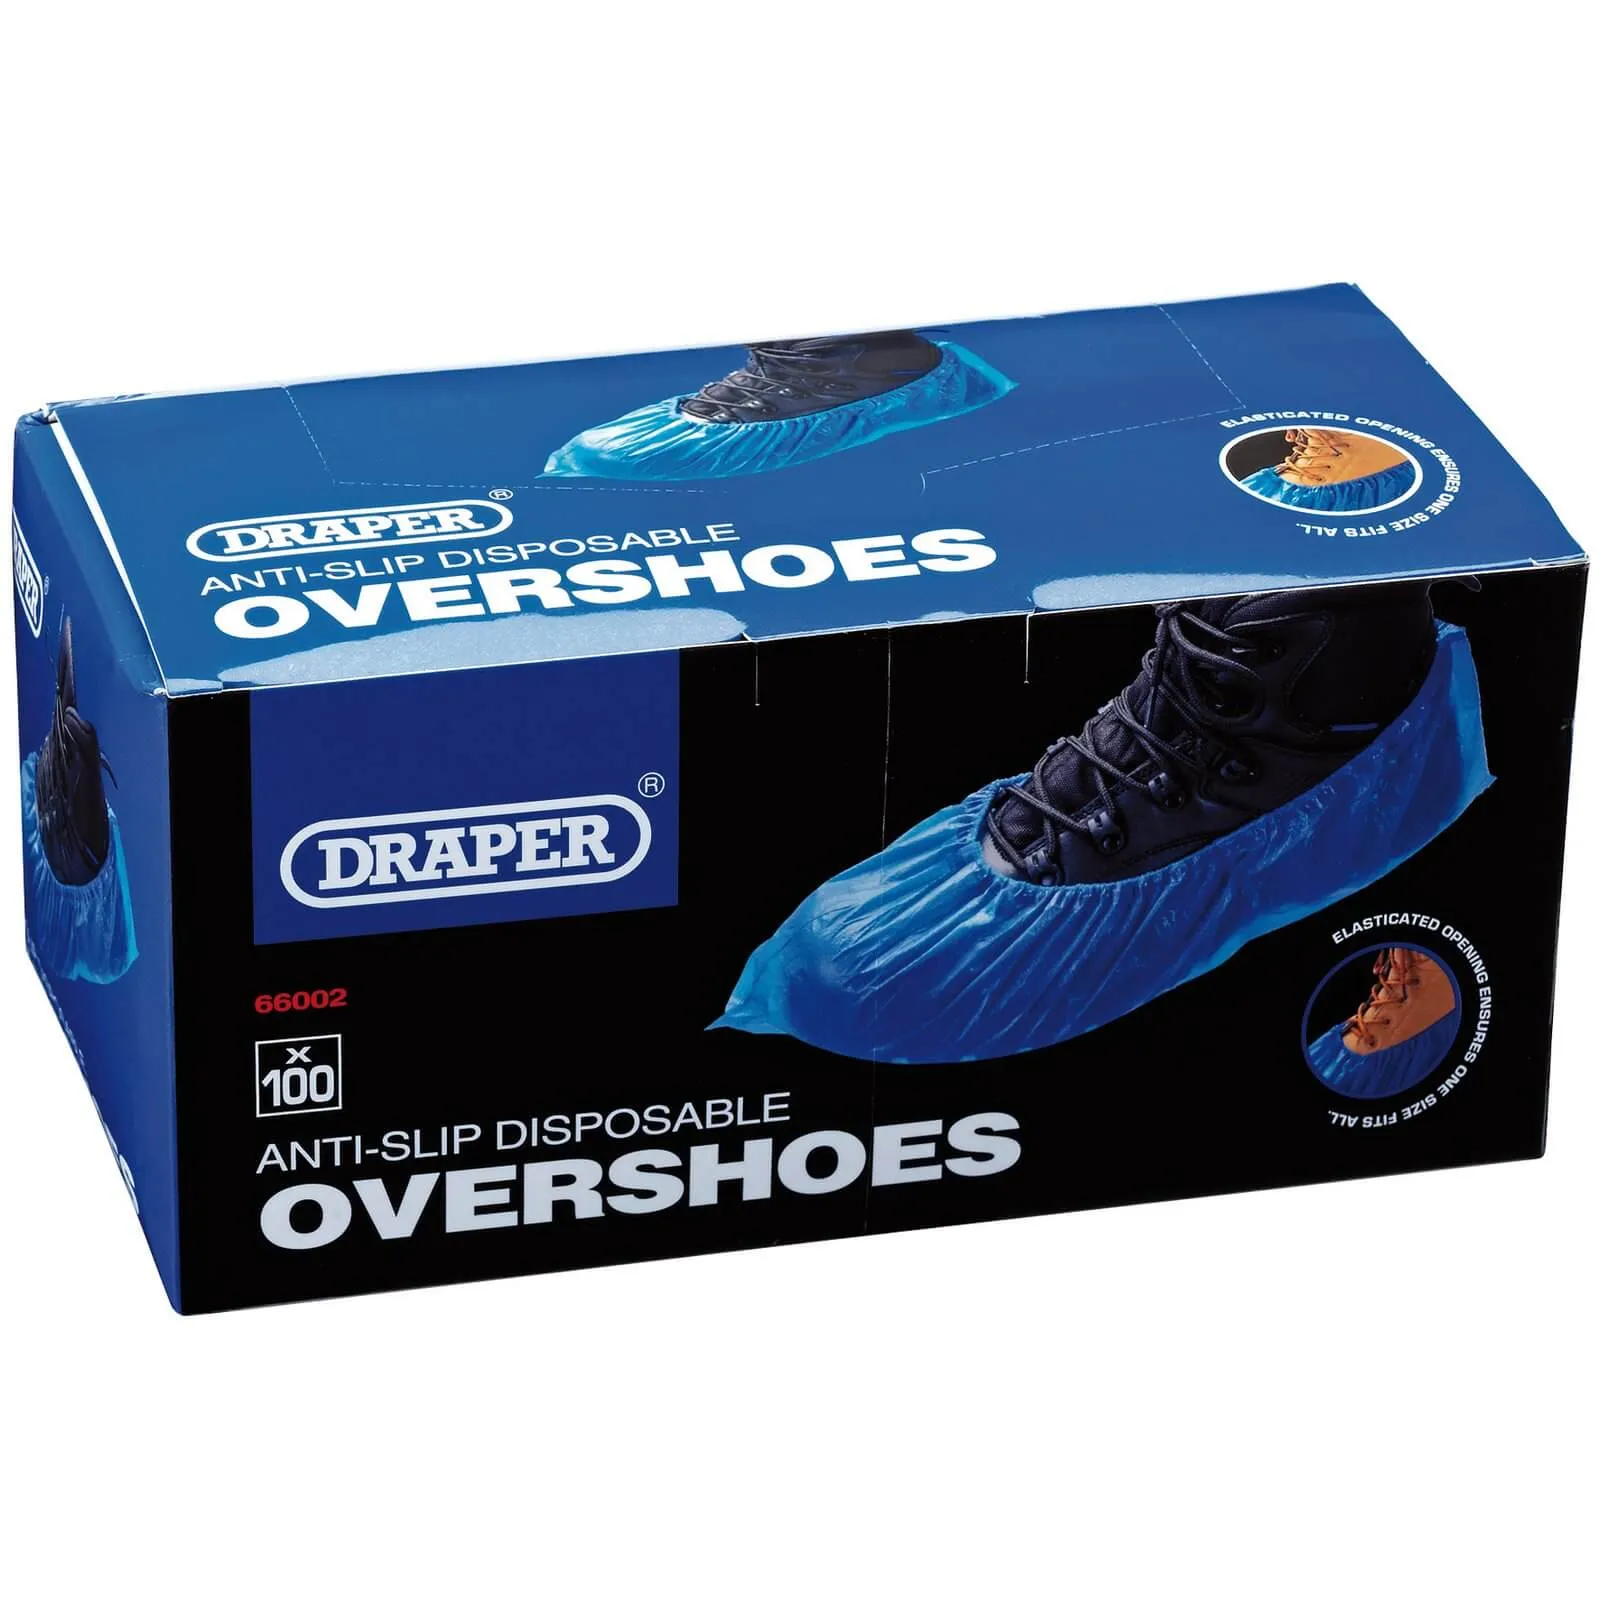 Draper Disposable Overshoe Covers - Pack of 100